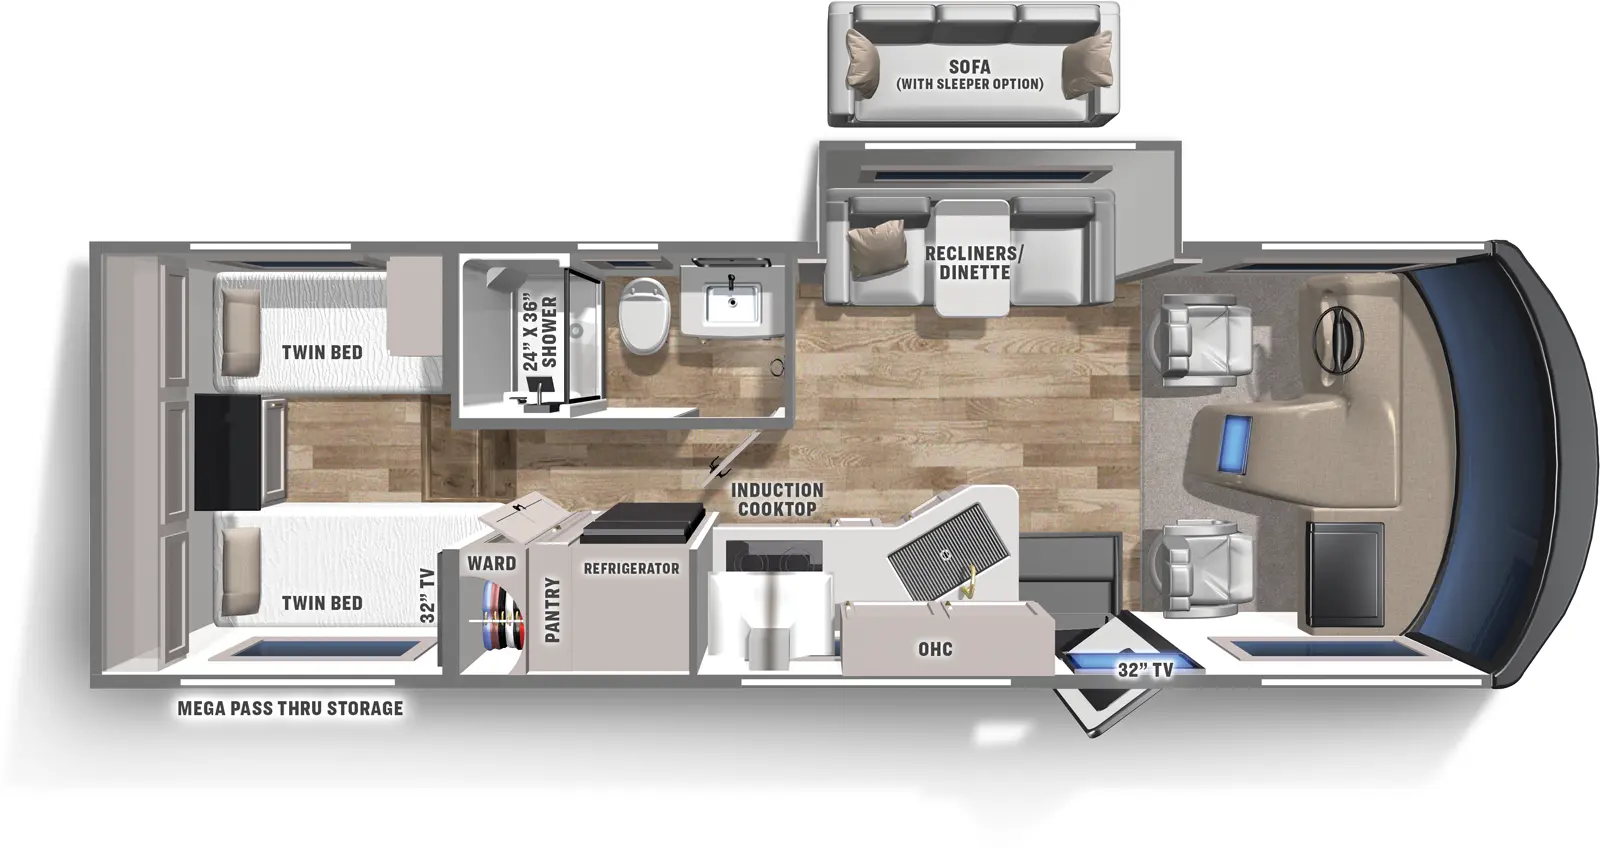 The 25TB has one slideout and one entry. Exterior features rear mega pass-through storage. Interior layout front to back: front cab area; off-door side slideout with recliners/dinette (sofa with sleeper optional); door side entry with TV above, kitchen counter with sink, overhead cabinet, induction cooktop, refrigerator, pantry, and wardrobe; off-door side full bathroom; rear bedroom with opposing twin beds, overhead cabinet, and TV.